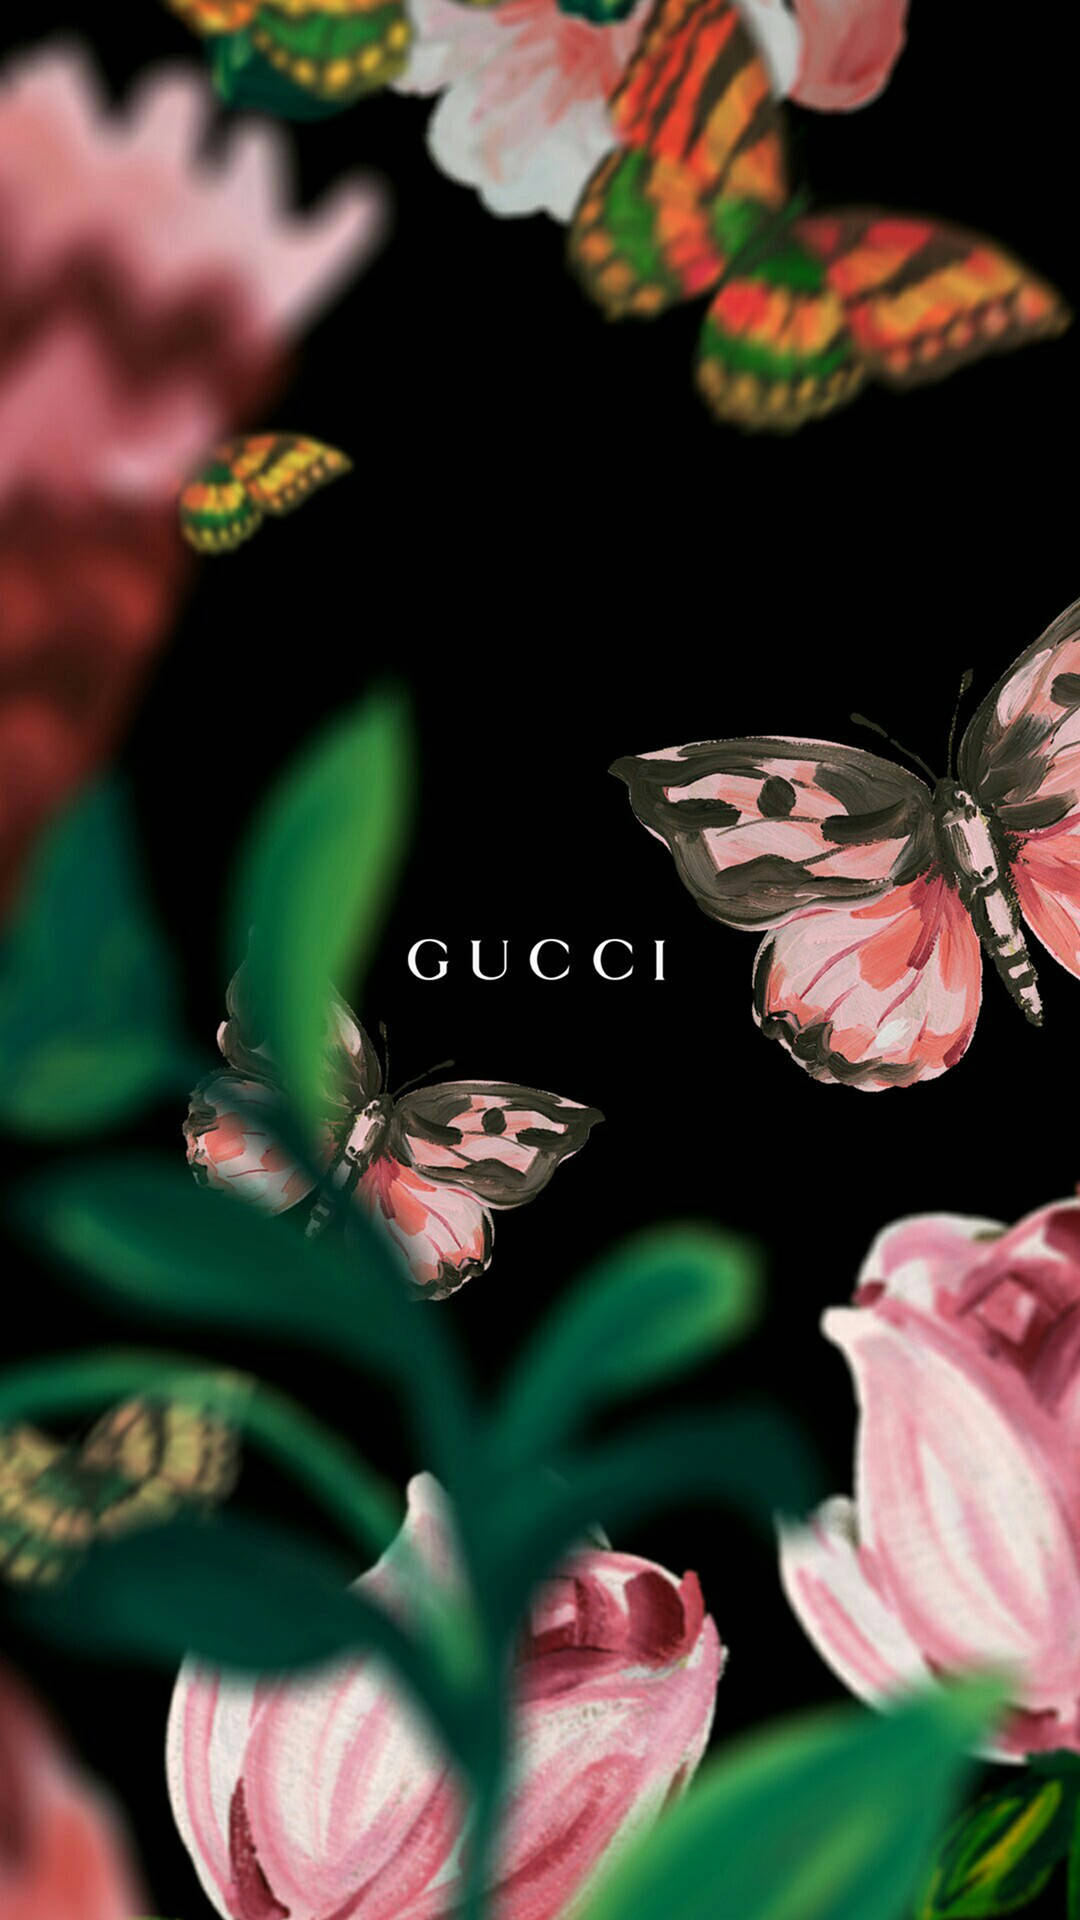 Gucci Aesthetic Dope Iphone Wallpaper